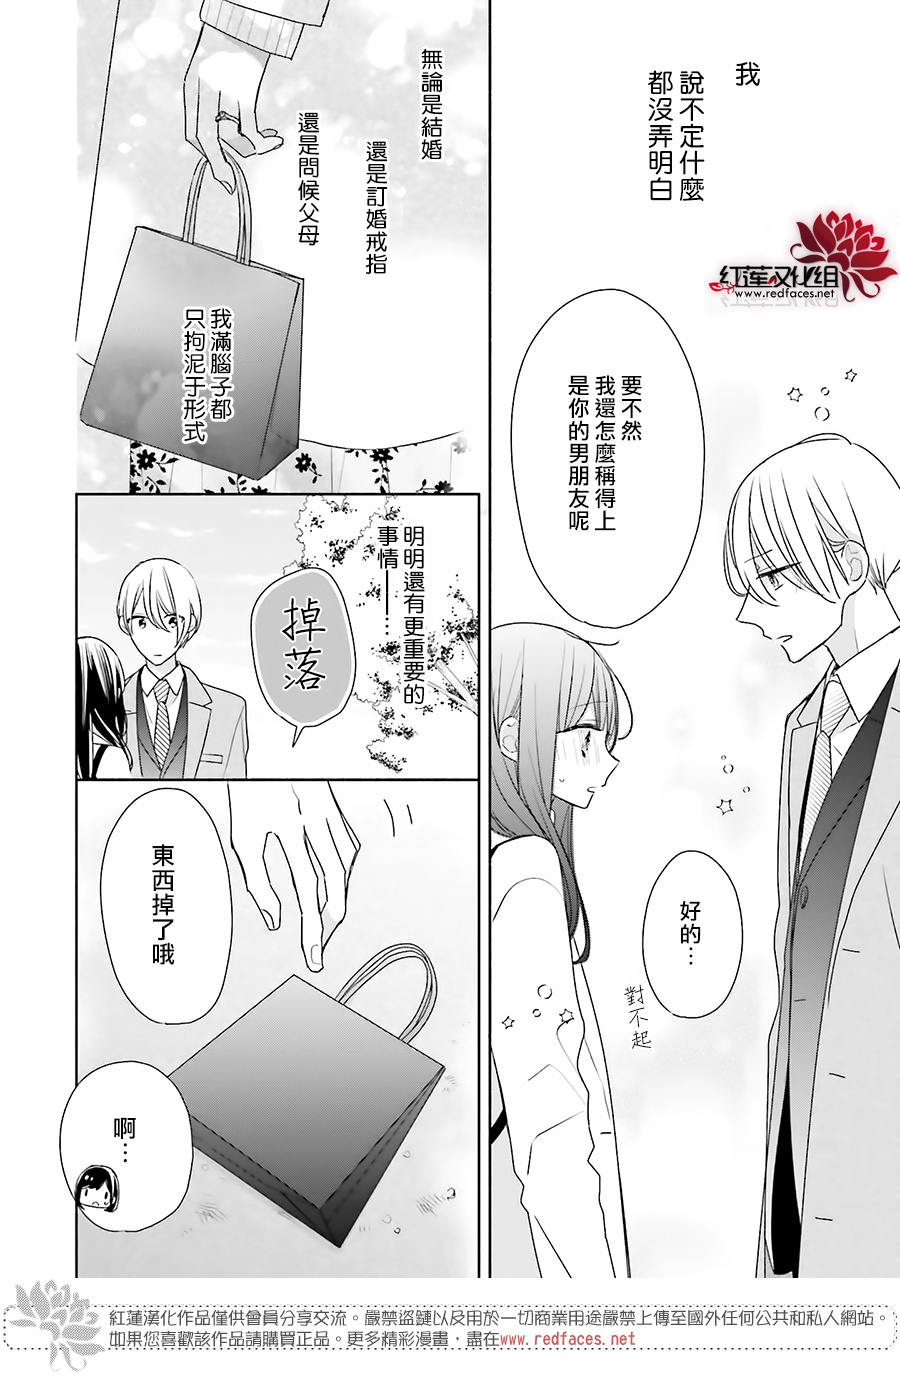 If given a second chance - 第39話 - 3